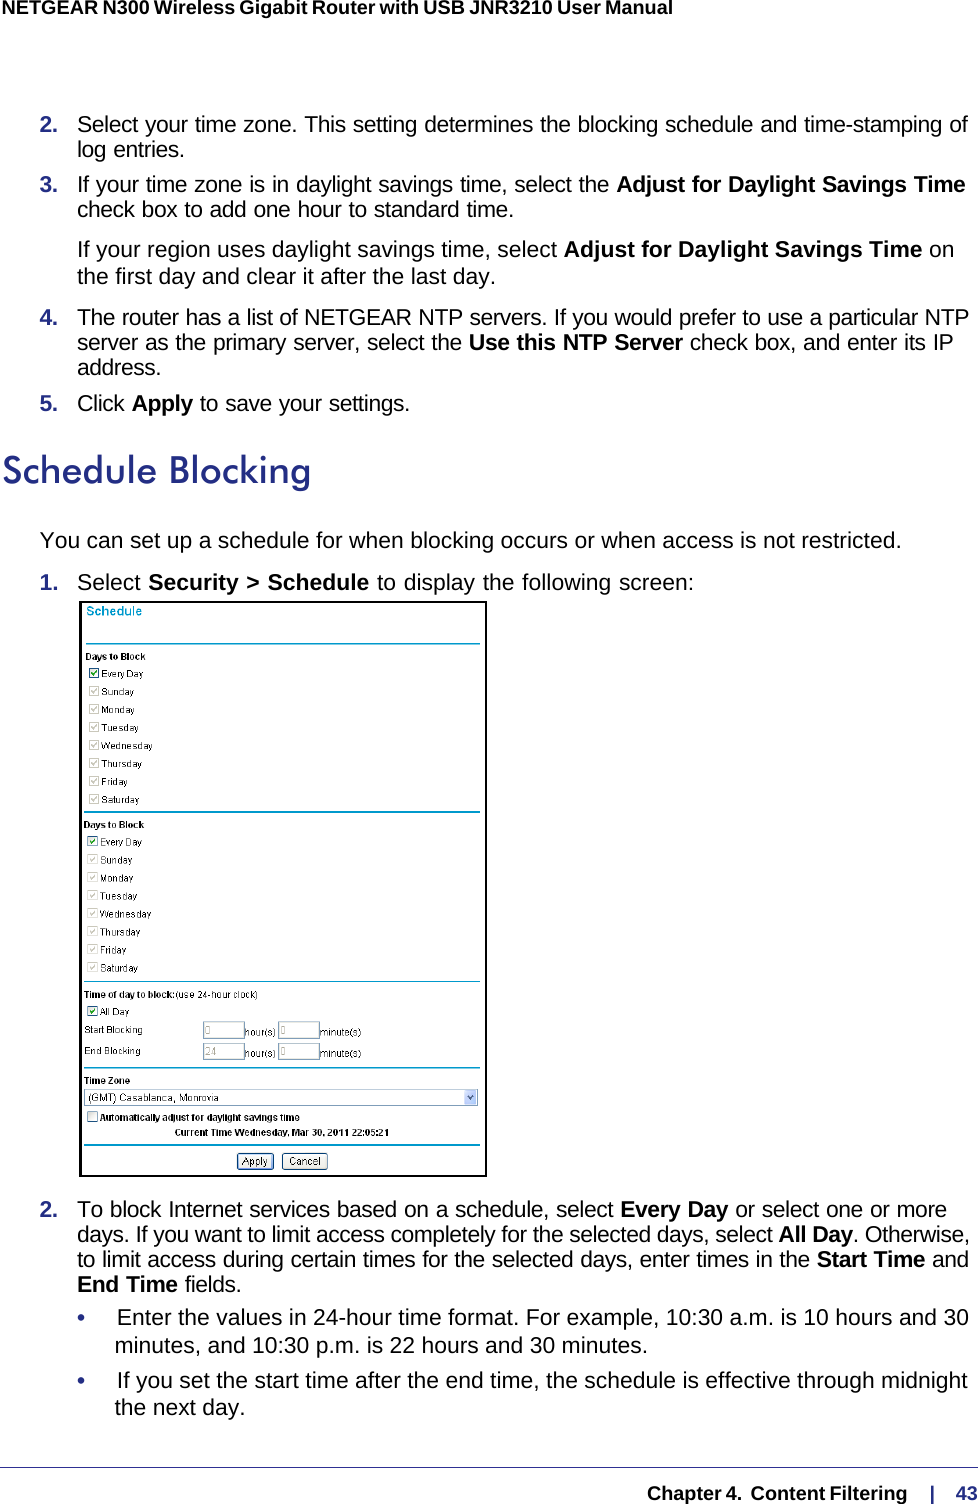   Chapter 4.  Content Filtering     |    43NETGEAR N300 Wireless Gigabit Router with USB JNR3210 User Manual 2.  Select your time zone. This setting determines the blocking schedule and time-stamping of log entries. 3.  If your time zone is in daylight savings time, select the Adjust for Daylight Savings Time check box to add one hour to standard time.If your region uses daylight savings time, select Adjust for Daylight Savings Time on the first day and clear it after the last day.4.  The router has a list of NETGEAR NTP servers. If you would prefer to use a particular NTP server as the primary server, select the Use this NTP Server check box, and enter its IP address.5.  Click Apply to save your settings.Schedule BlockingYou can set up a schedule for when blocking occurs or when access is not restricted. 1.  Select Security &gt; Schedule to display the following screen:2.  To block Internet services based on a schedule, select Every Day or select one or more days. If you want to limit access completely for the selected days, select All Day. Otherwise, to limit access during certain times for the selected days, enter times in the Start Time and End Time fields.•     Enter the values in 24-hour time format. For example, 10:30 a.m. is 10  hours and 30 minutes, and 10:30 p.m. is 22 hours and 30 minutes. •     If you set the start time after the end time, the schedule is effective through midnight the next day.